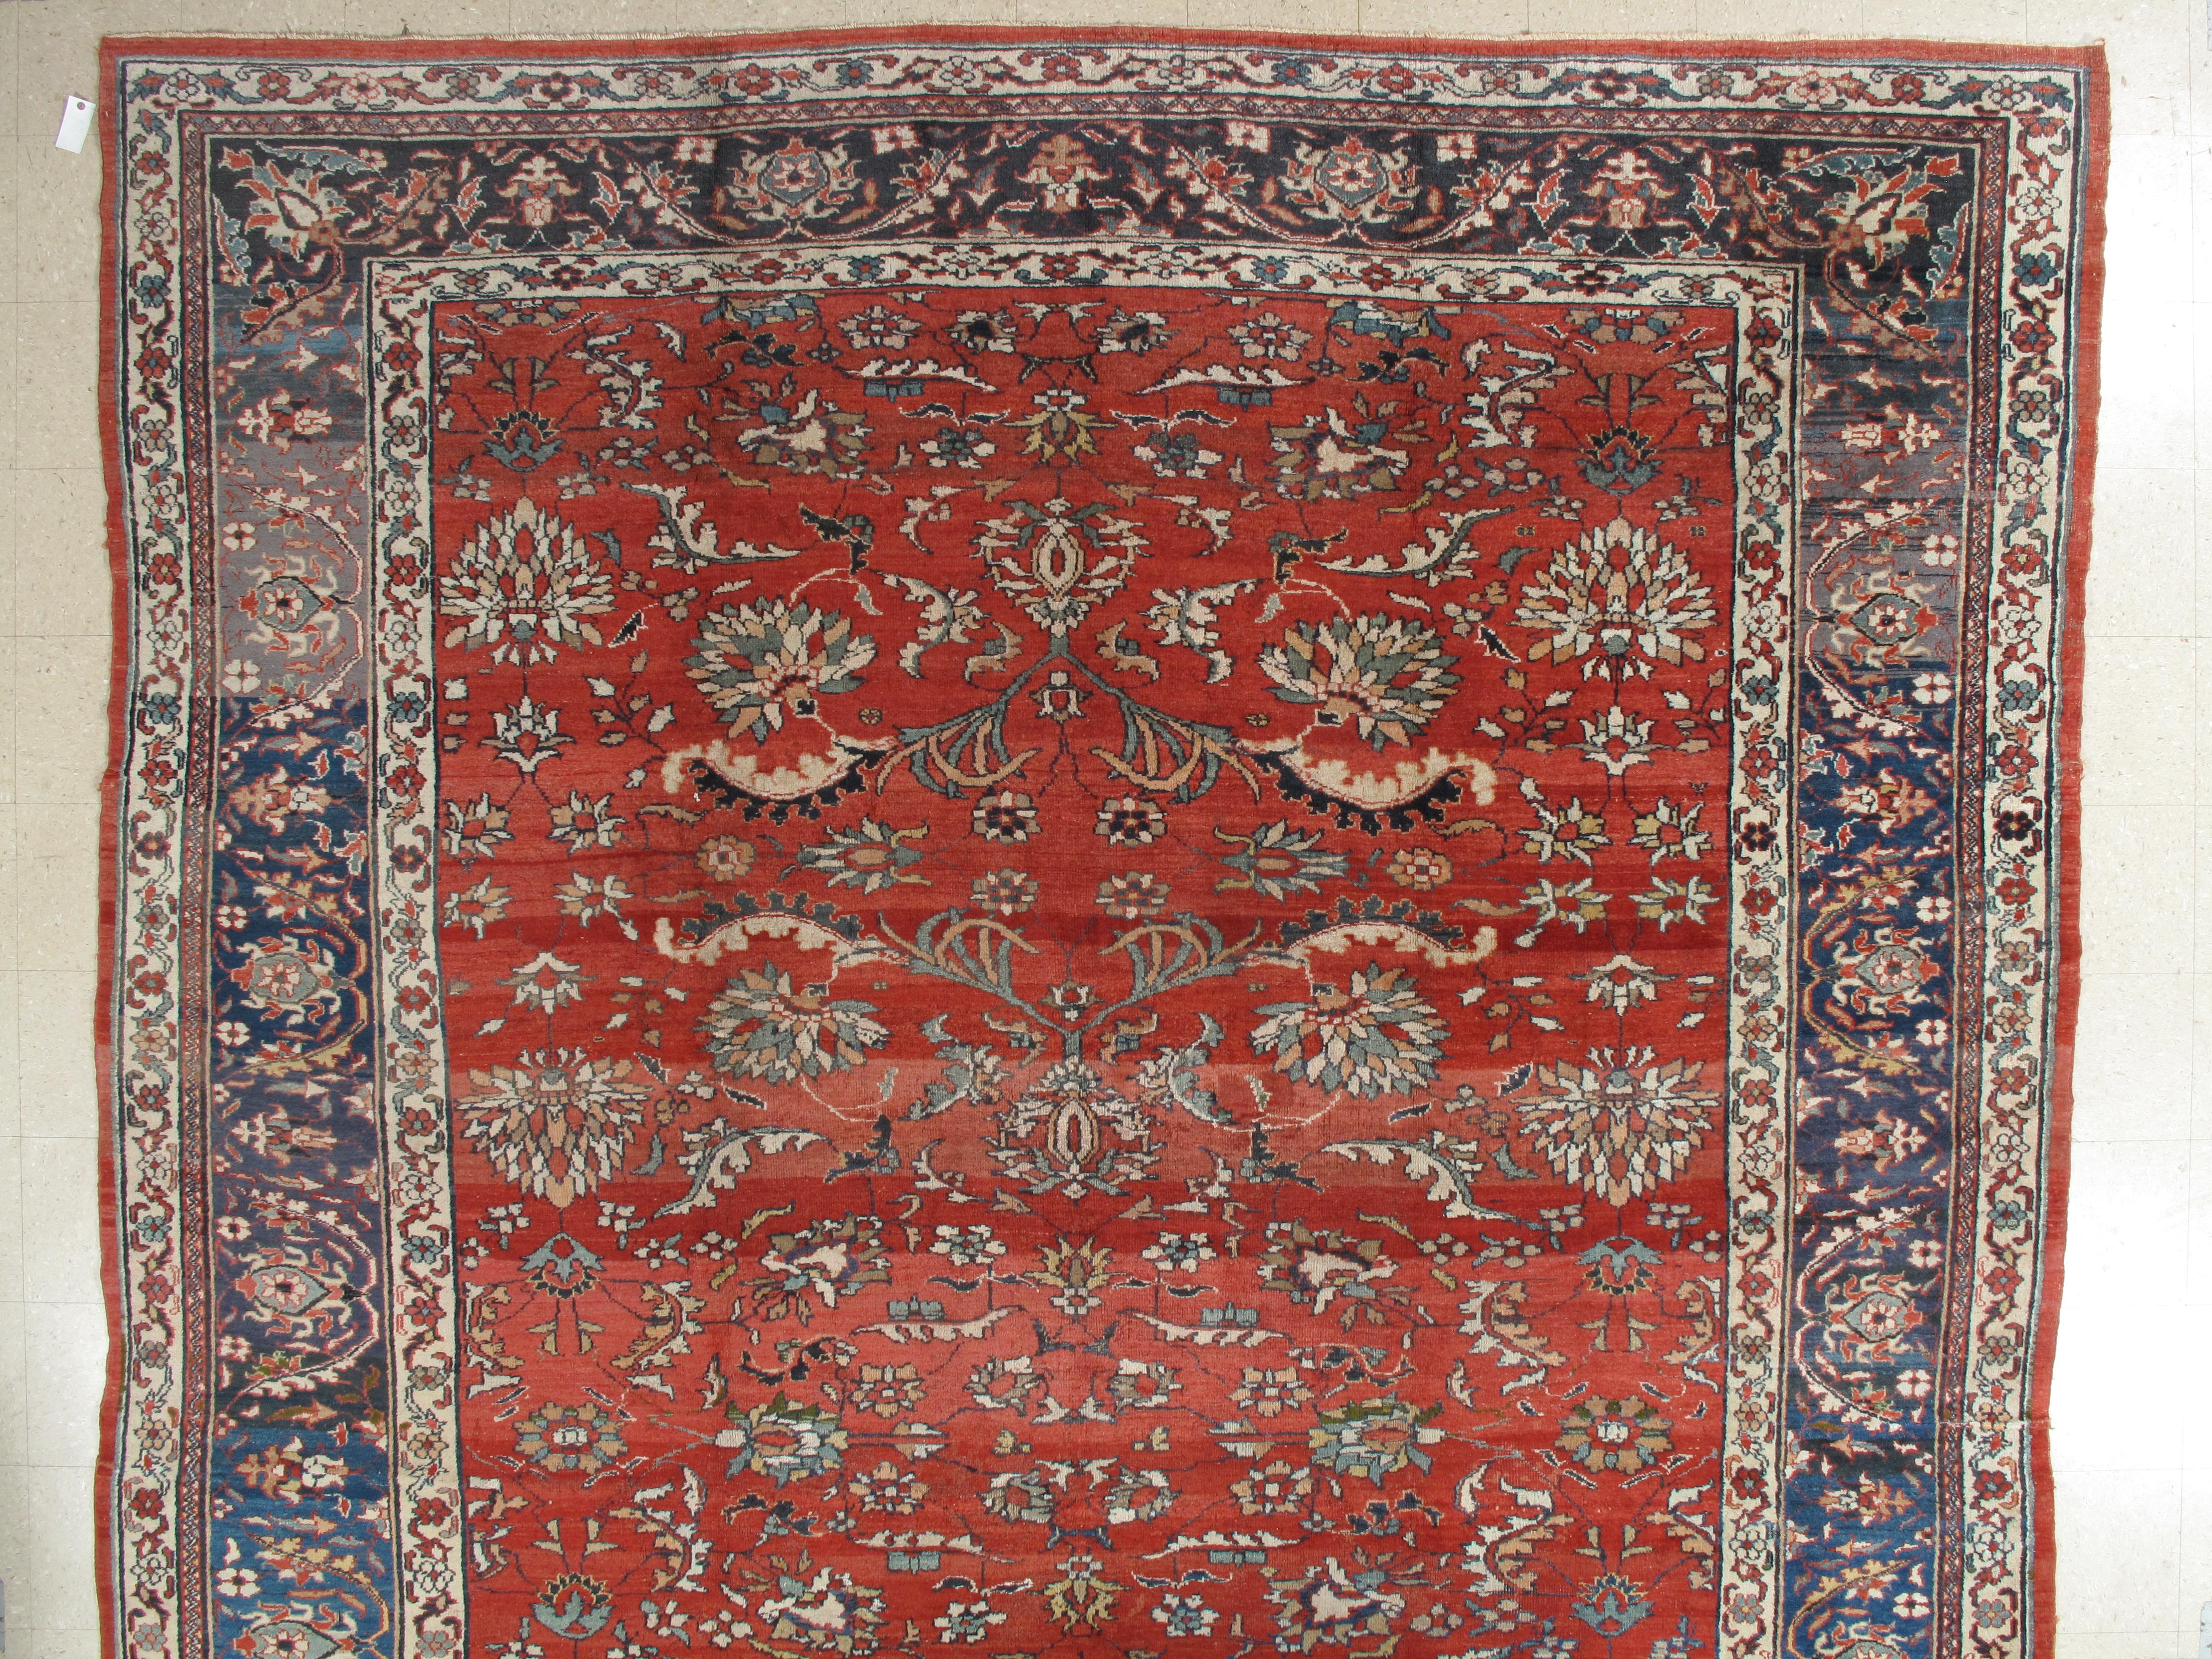 Sultanabad is a region in NW Persia. It was the site of the principle Ziegler weavings in the late 19th century. Sultanabad's are famous for their floral designs as they improved the quality and designs to match the European taste. Adapting the